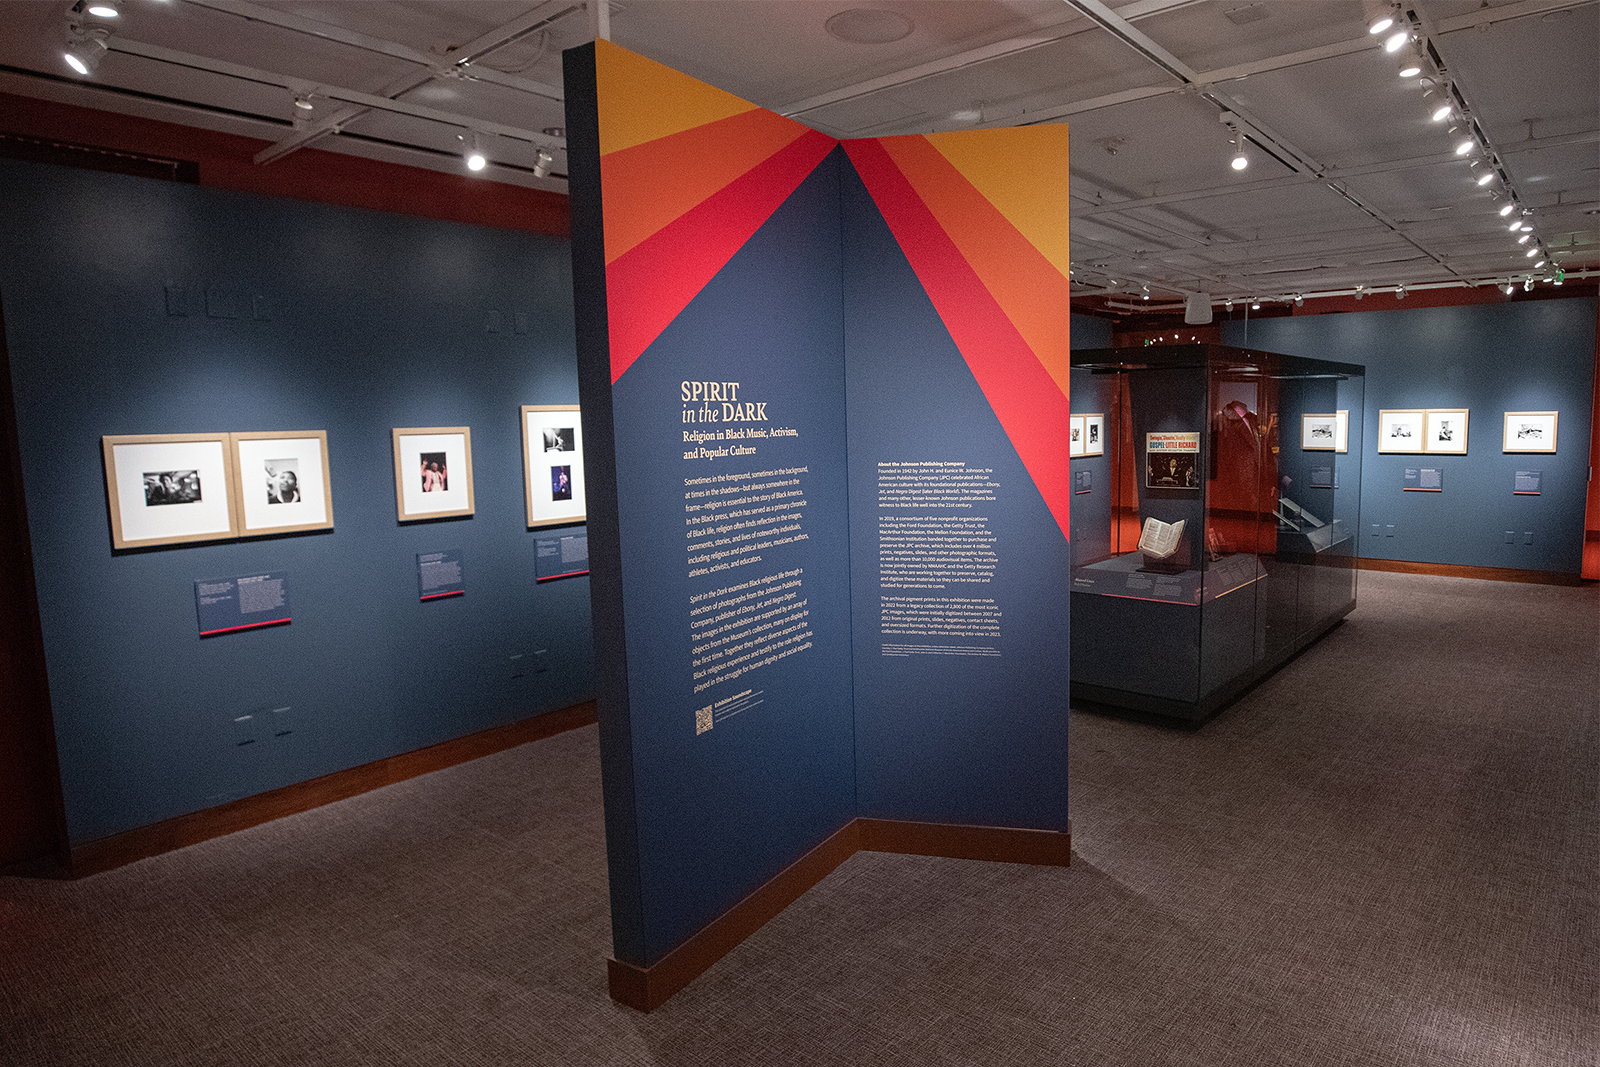 “Spirit in the Dark: Religion in Black Music, Activism and Popular Culture,” a new exhibition of the Smithsonian’s National Museum of African American History and Culture. Photo by the National Museum of African American History and Culture